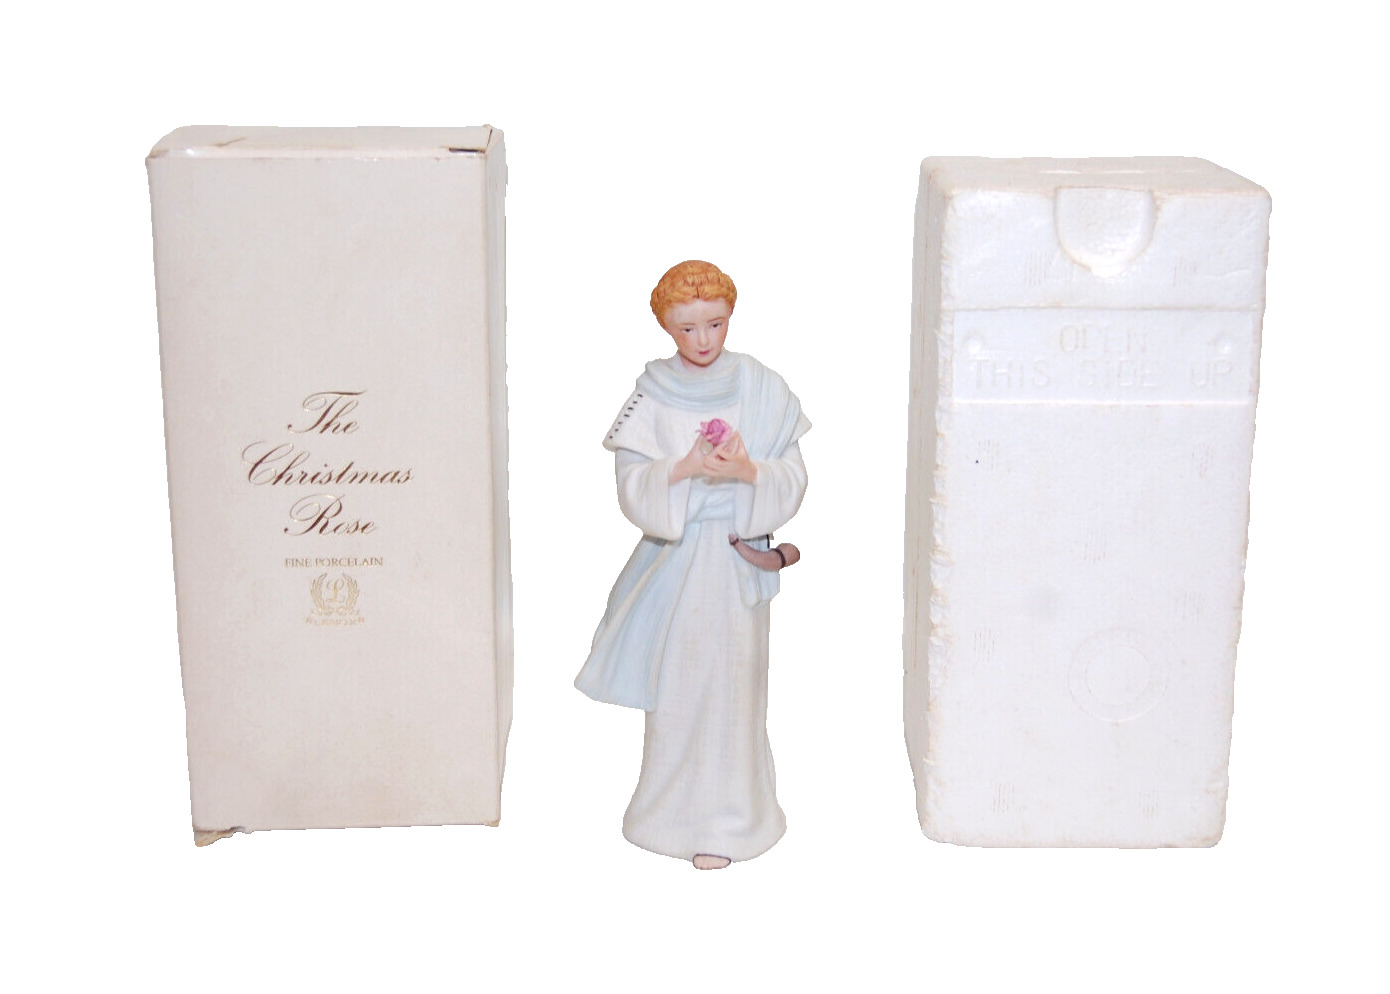 Lenox Holiday  The Christmas Rose  Fine Porcelain Figurine in Box   X1596